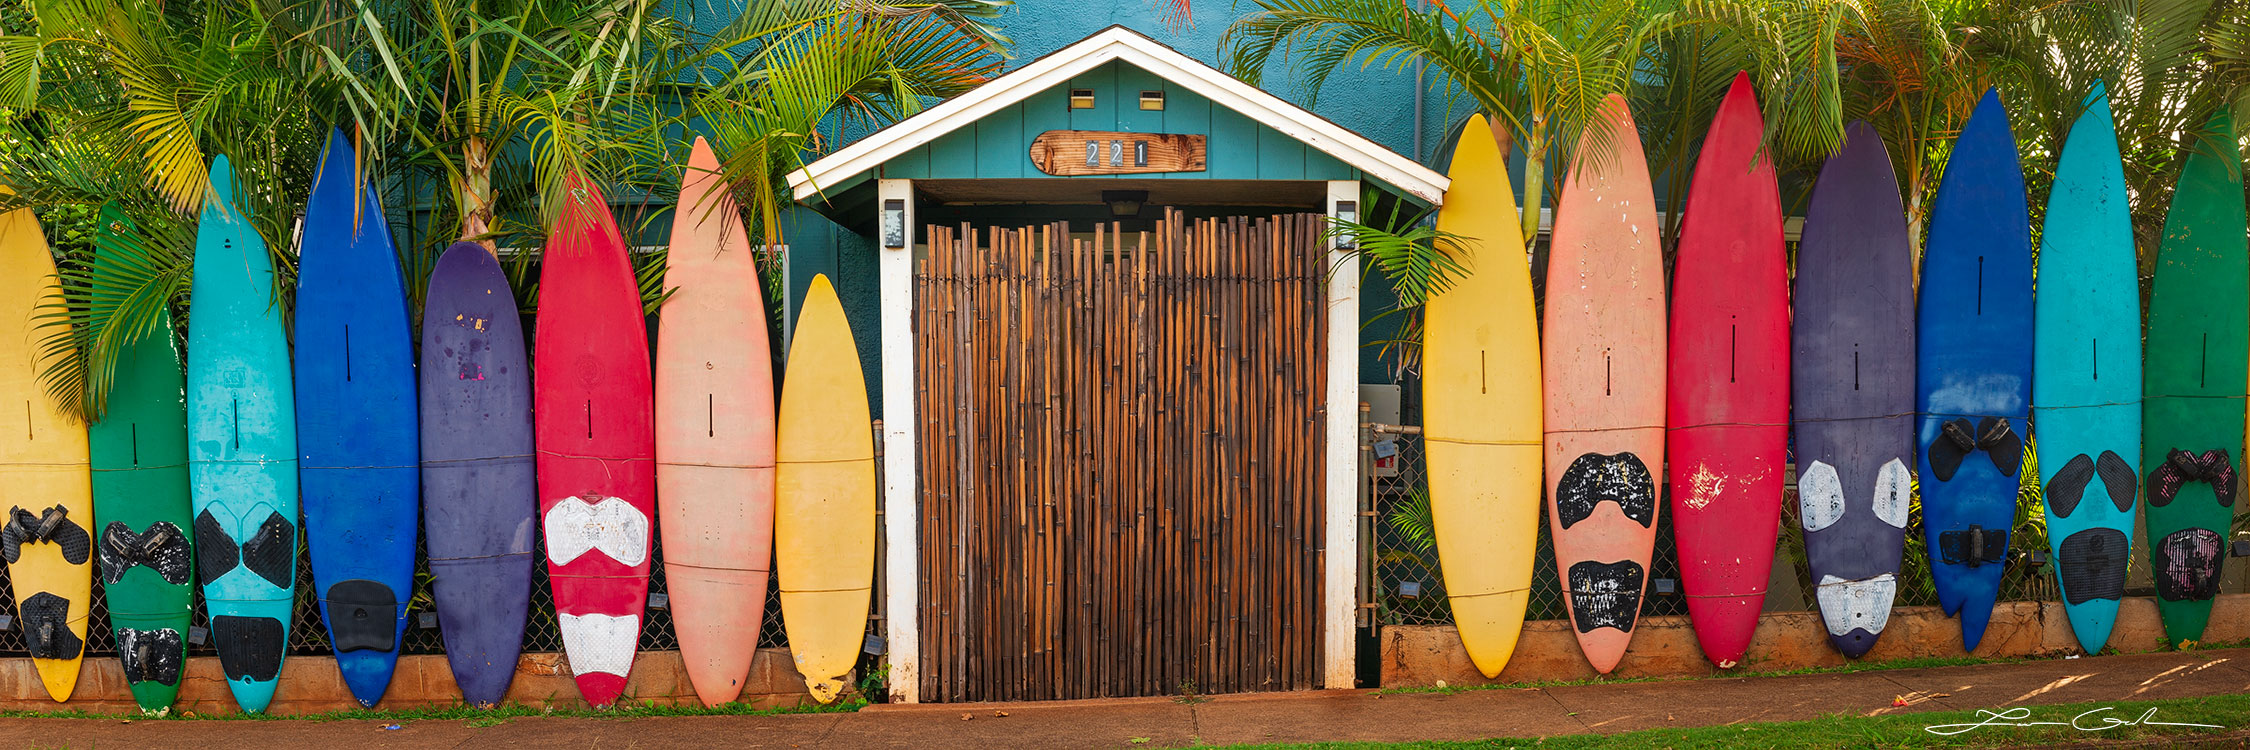 Panoramic image of a colorful surfboard fence in Maui, HI, with a bamboo door and palm trees peeking over - Gintchin Fine Art.